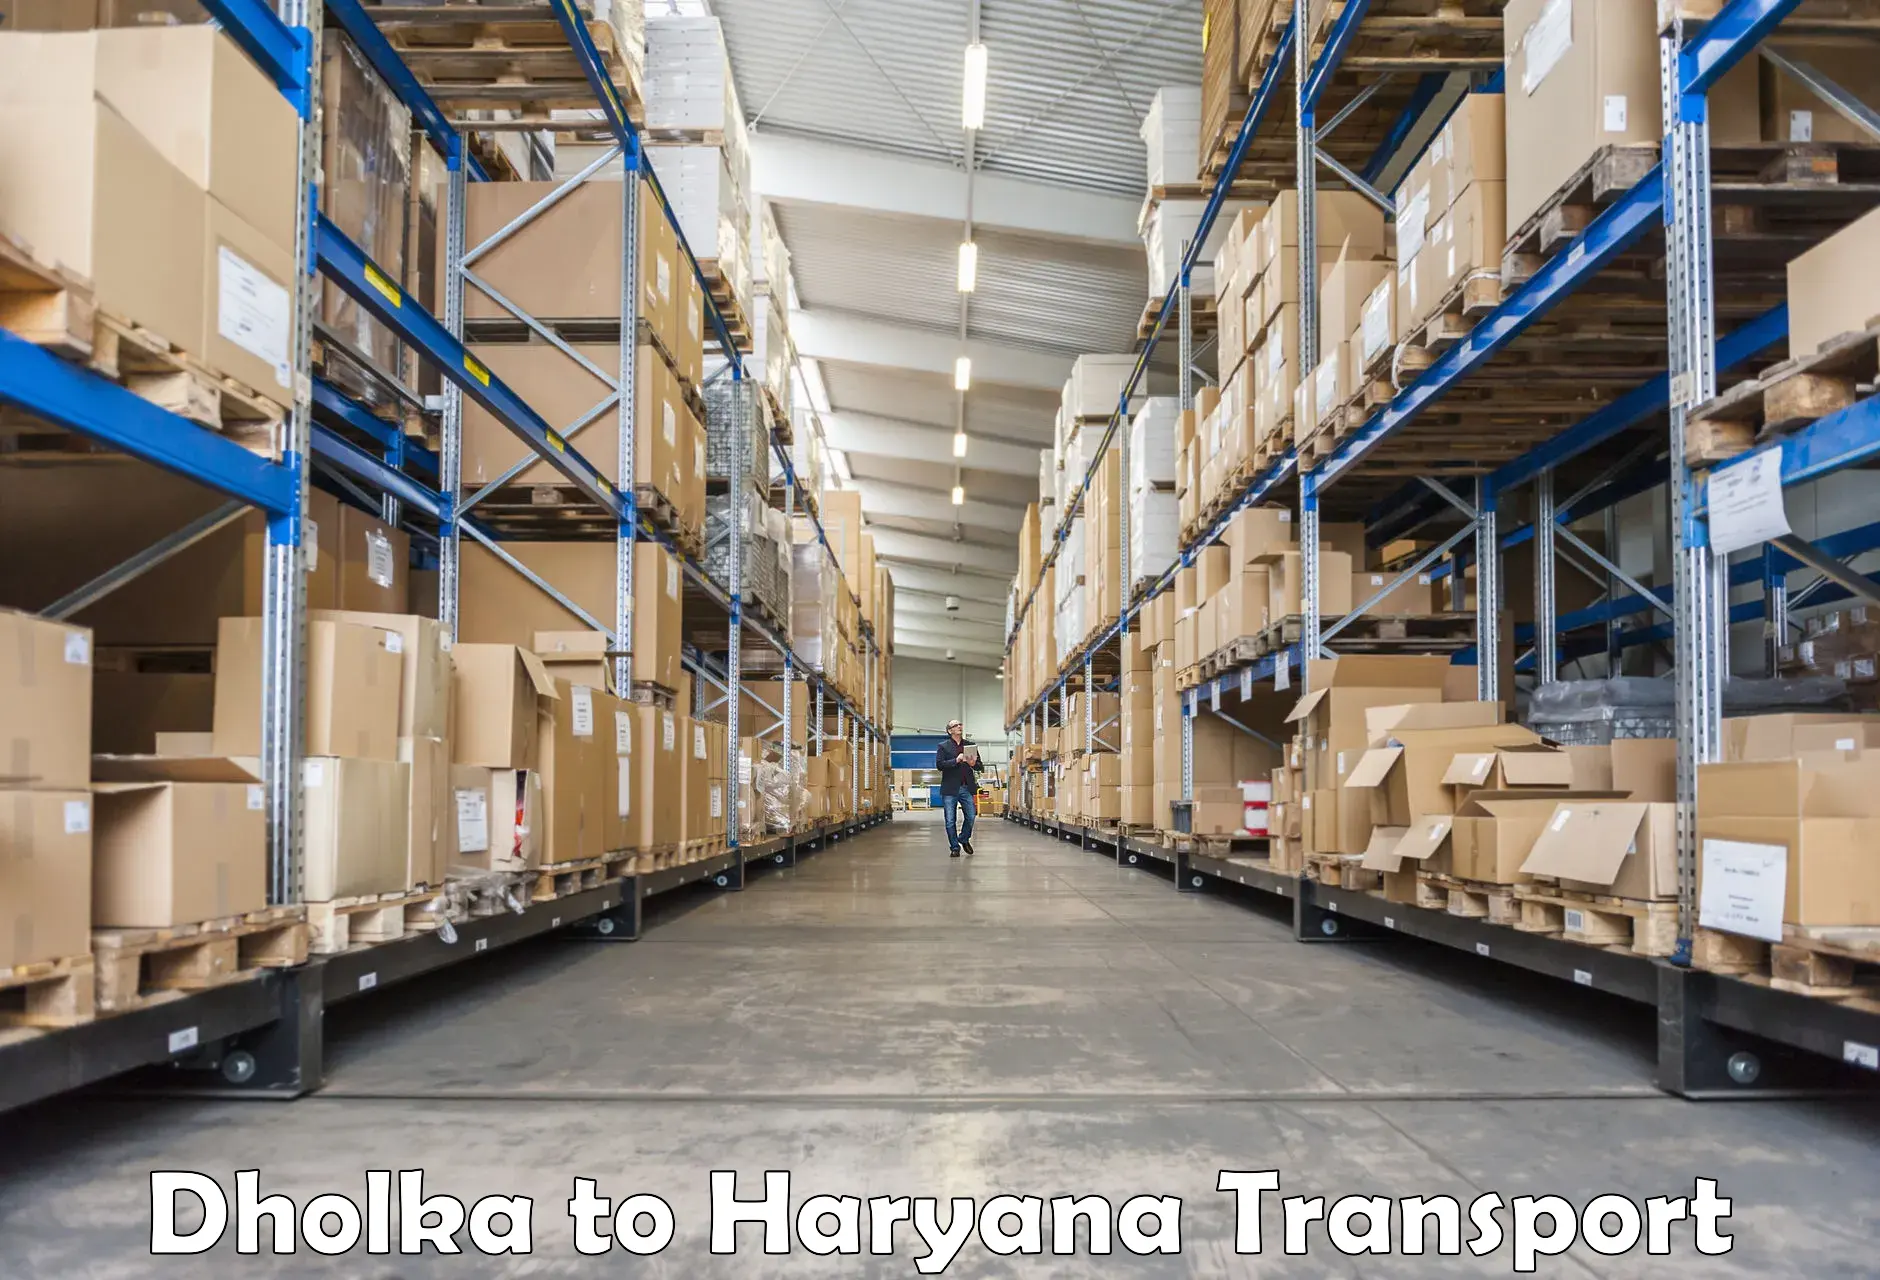 Transport bike from one state to another Dholka to Haryana